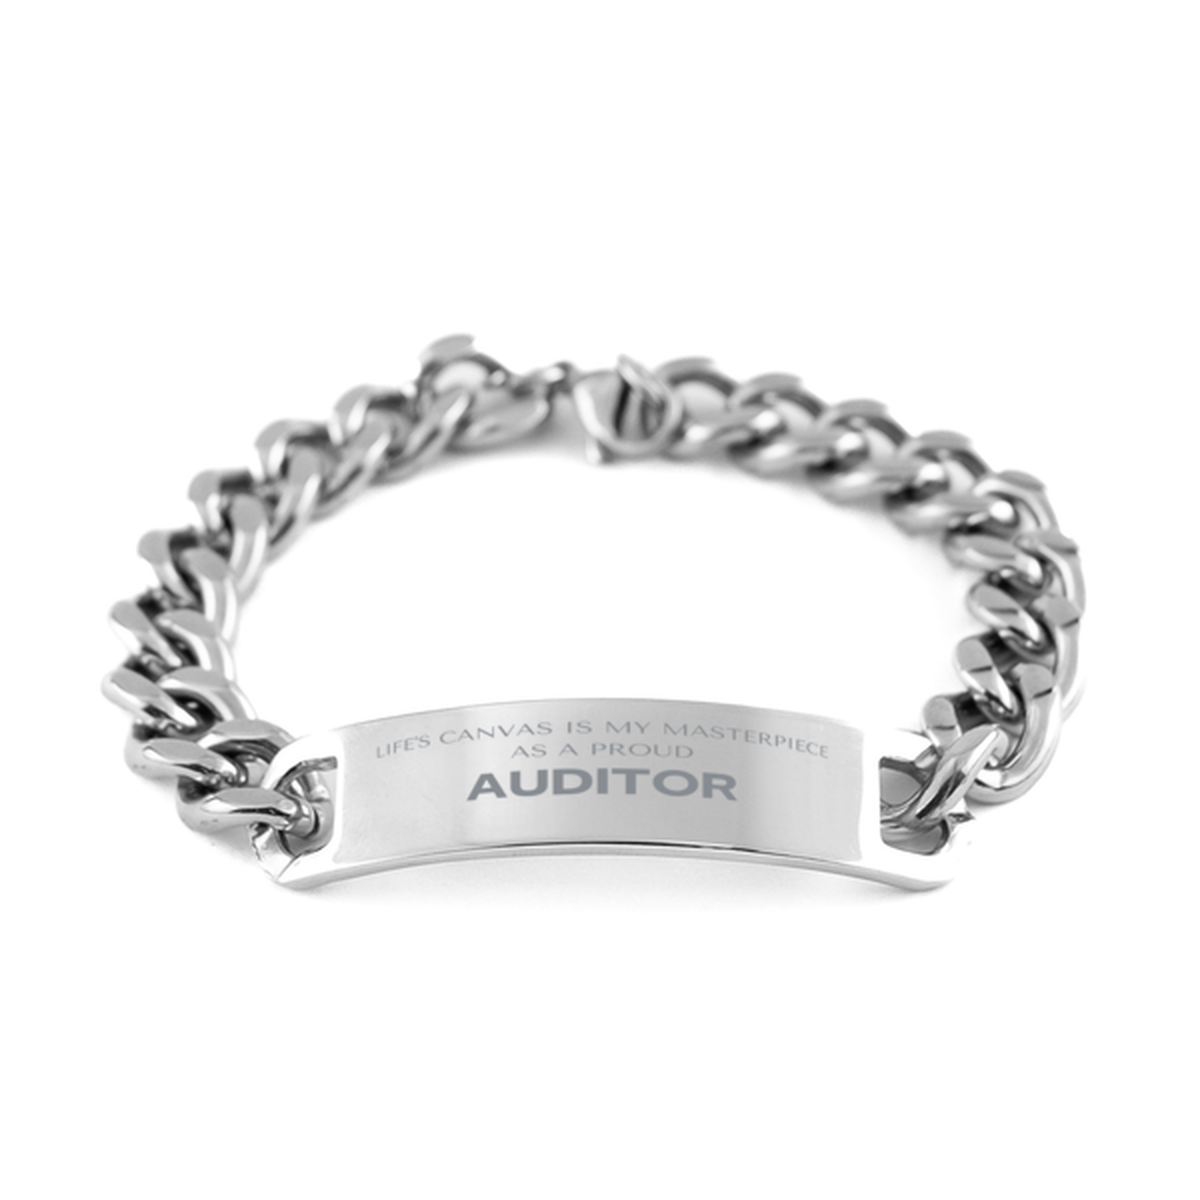 Proud Auditor Gifts, Life's canvas is my masterpiece, Epic Birthday Christmas Unique Cuban Chain Stainless Steel Bracelet For Auditor, Coworkers, Men, Women, Friends